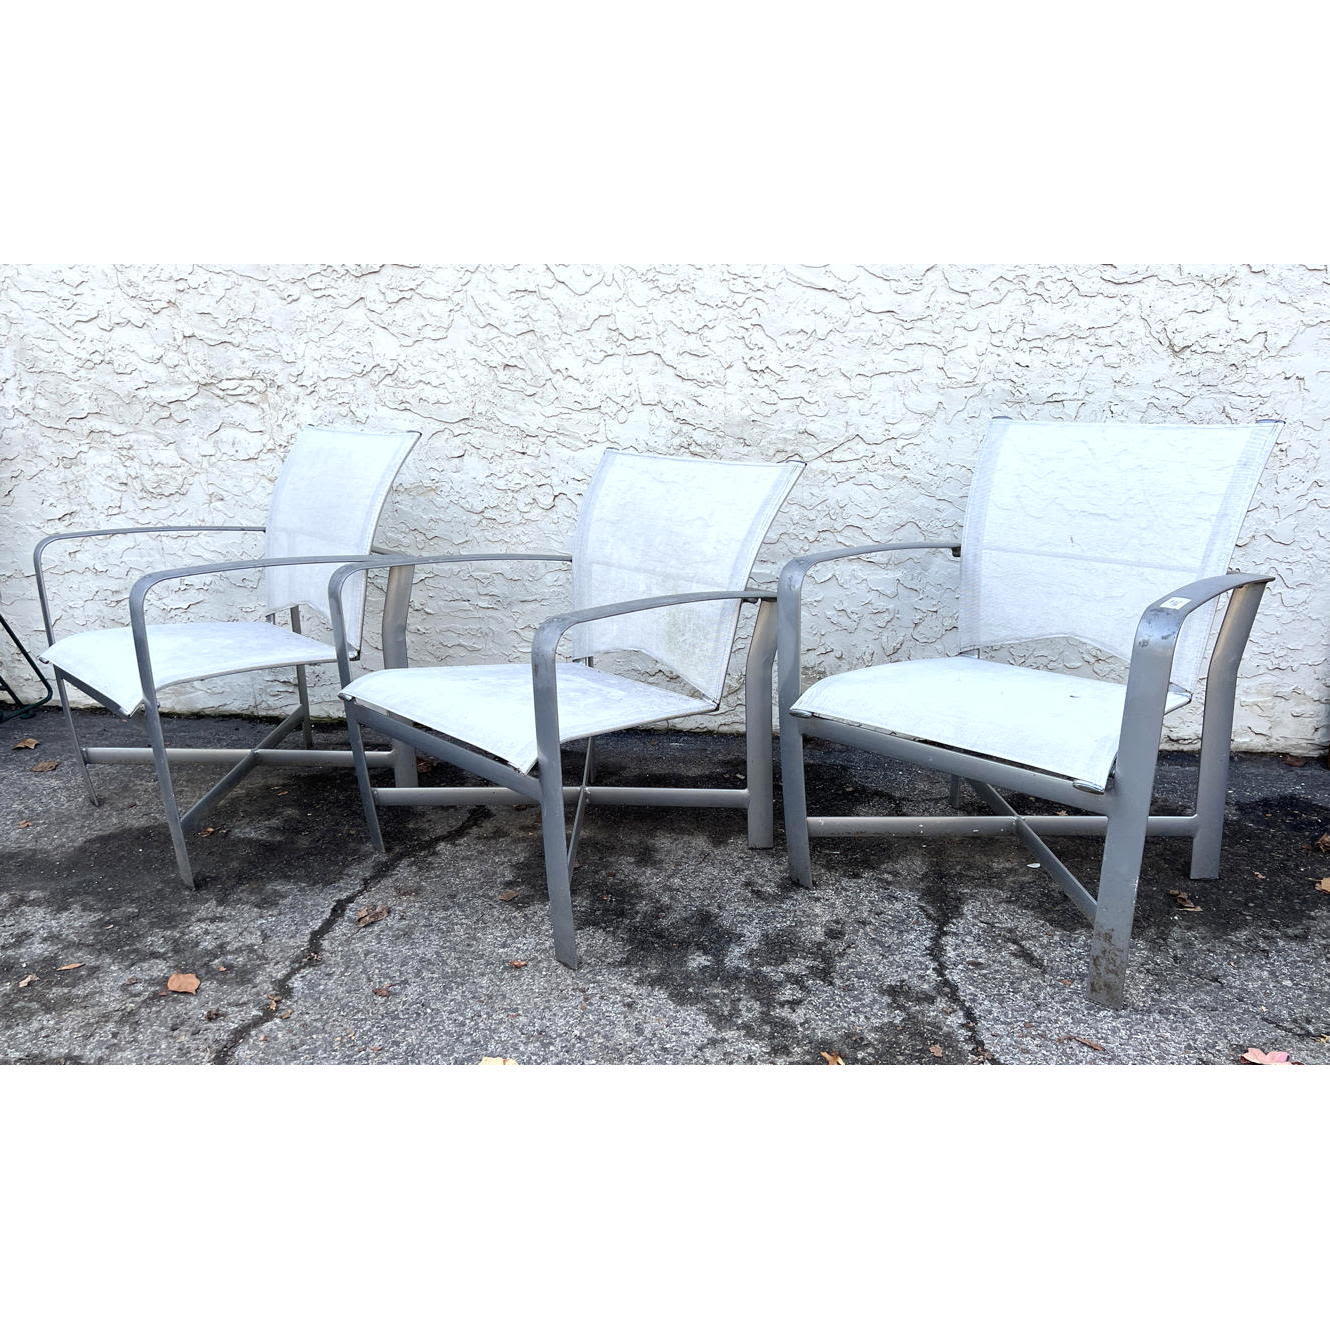 set 3 outdoor Patio Lounge Chairs.